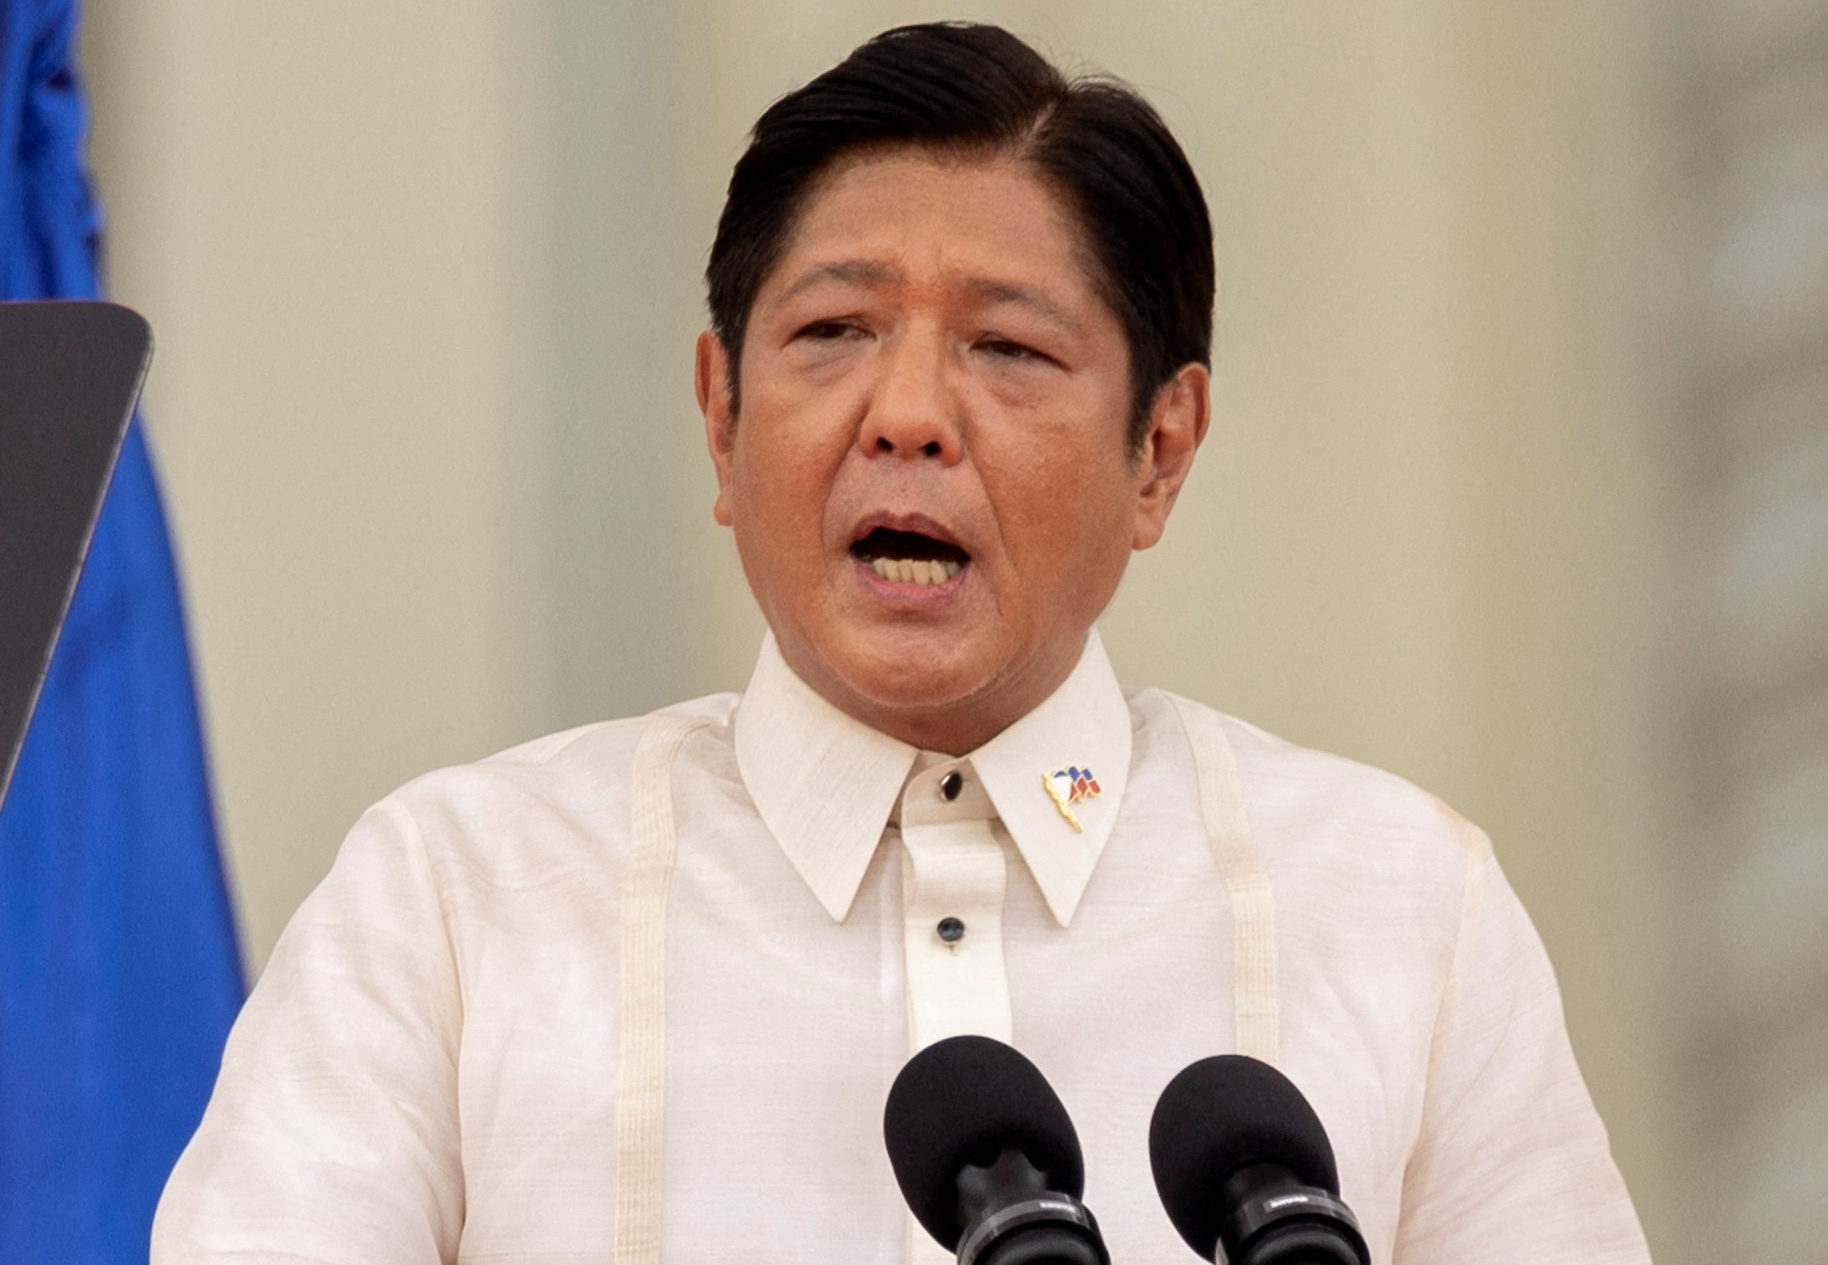 Bongbong Marcos issues his first order as the country's top leader which is to abolish the Presidential Anti-Corruption Commission (PACC) and the Office of the Cabinet Secretary